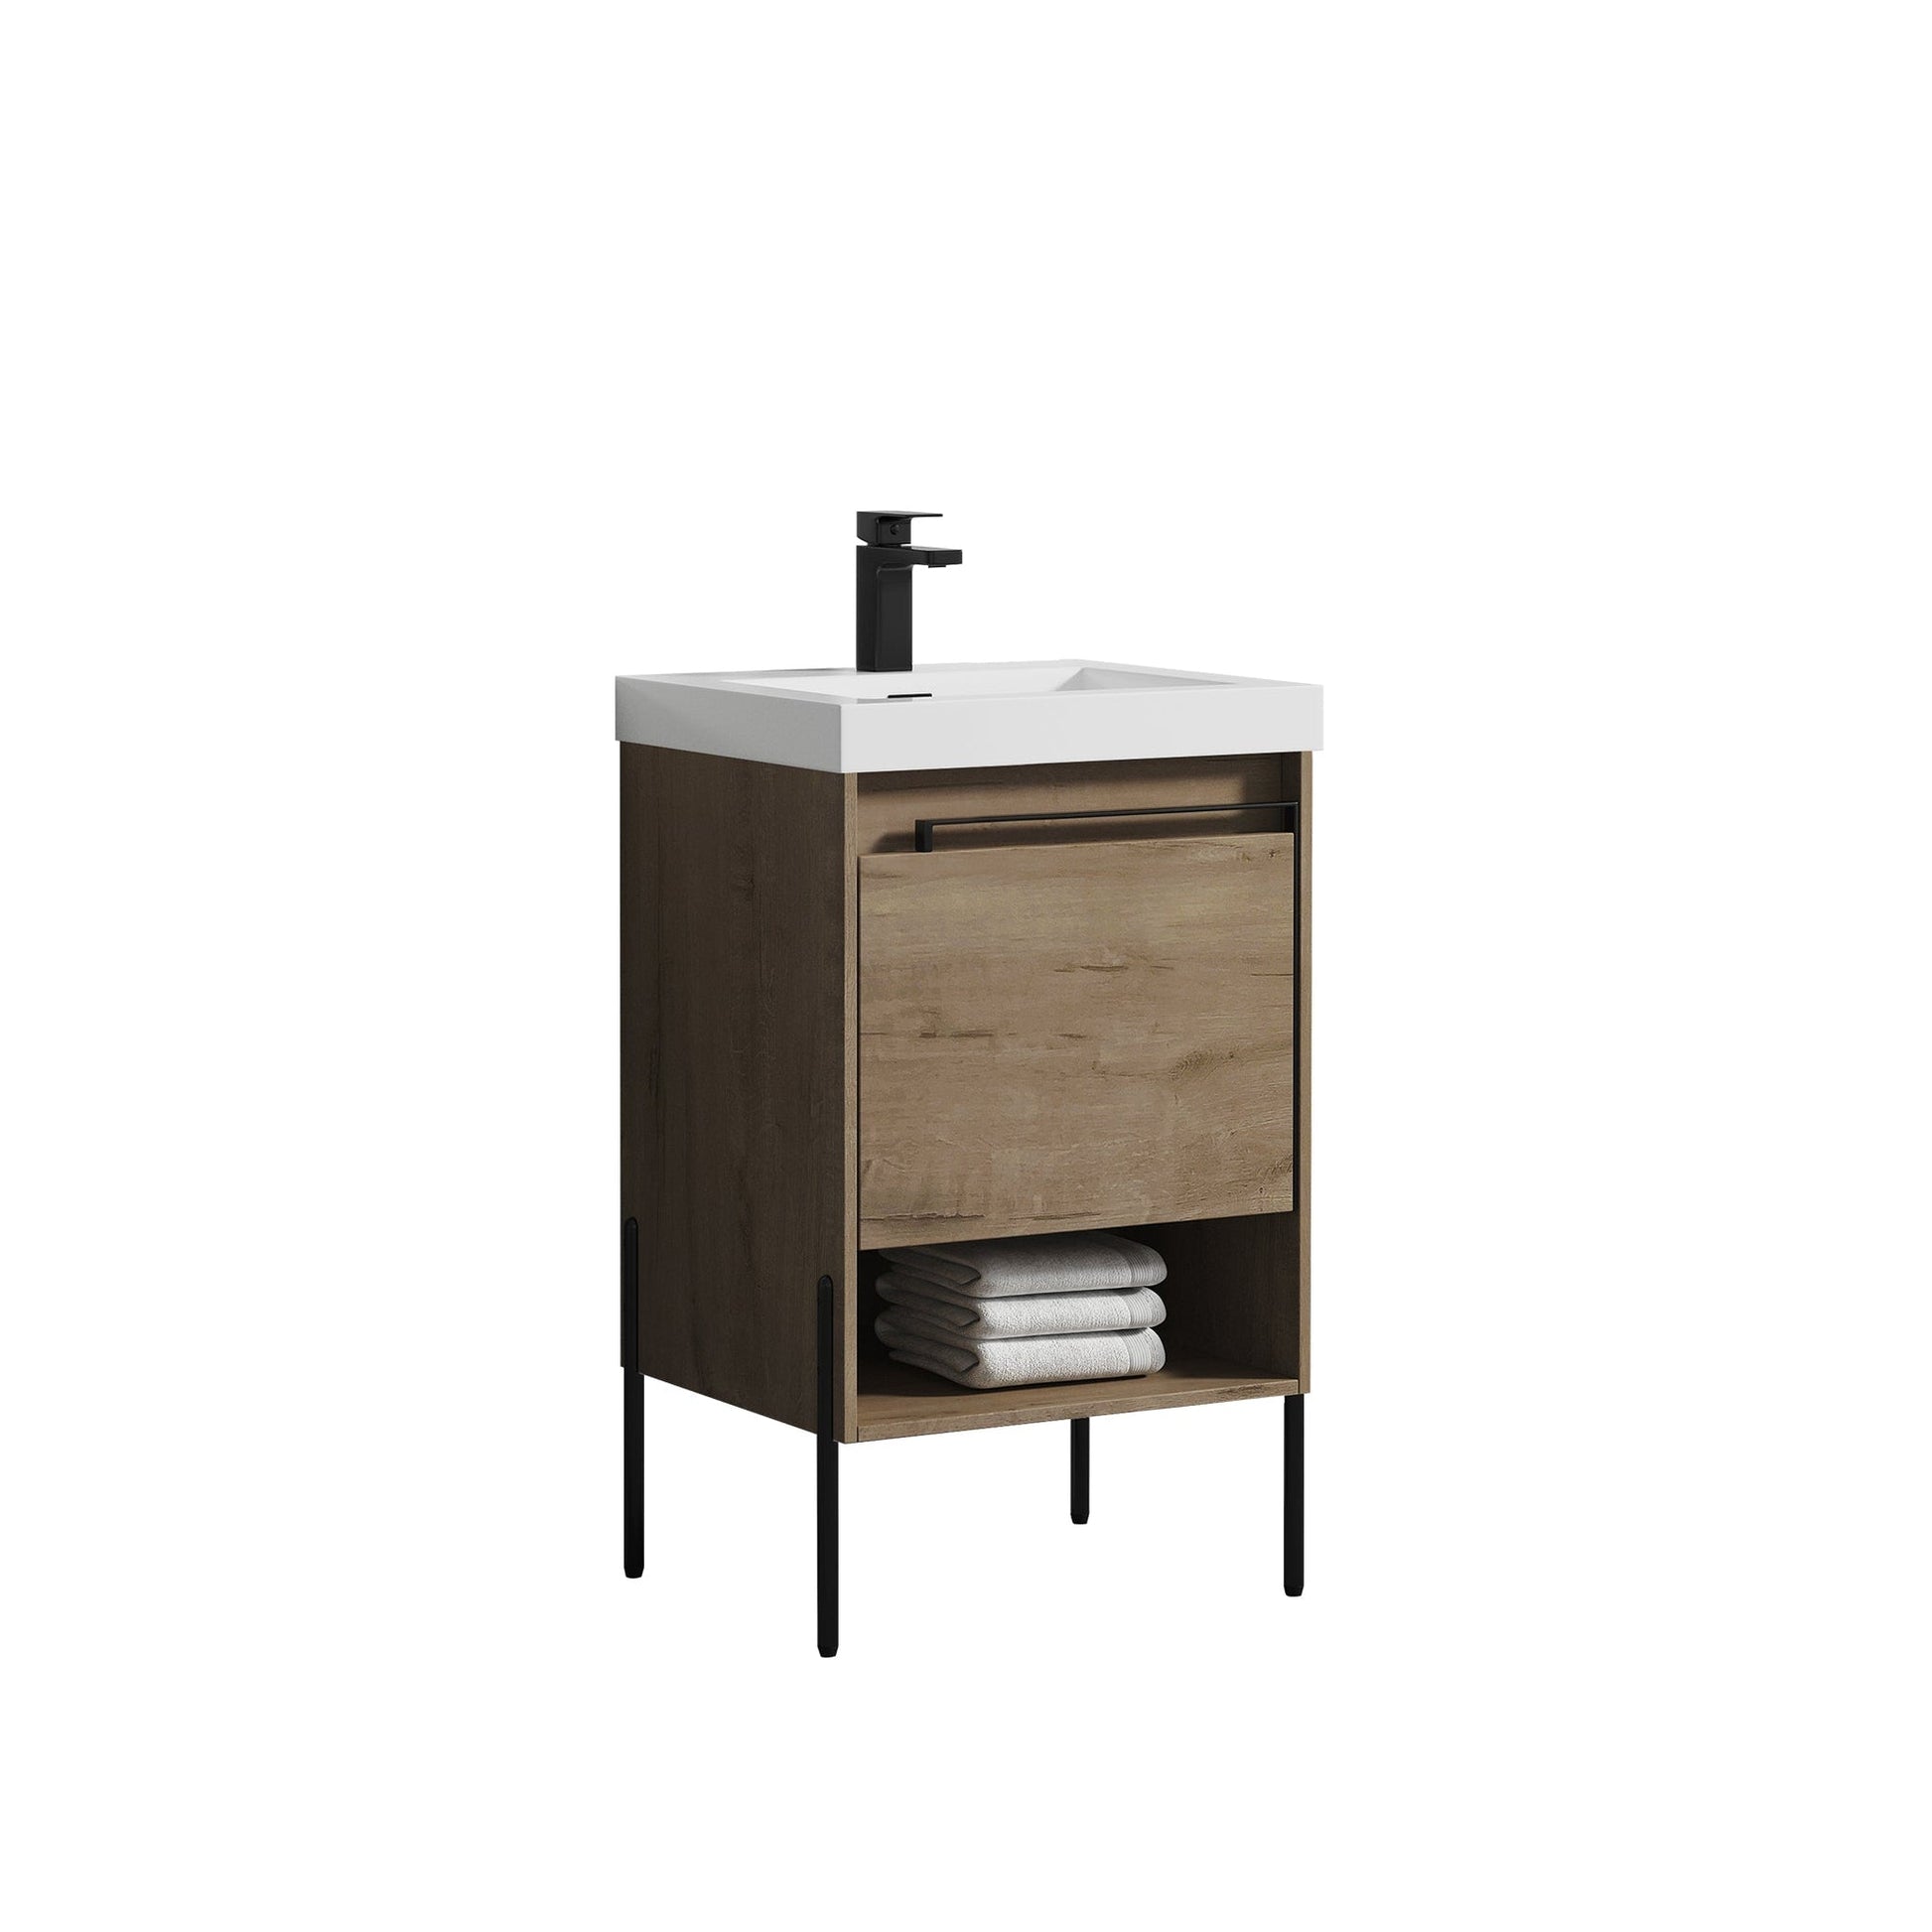 Blossom Turin 20" 1-Drawer Classic Oak Freestanding Single Vanity Base With Open Shelf, Handle and Legs